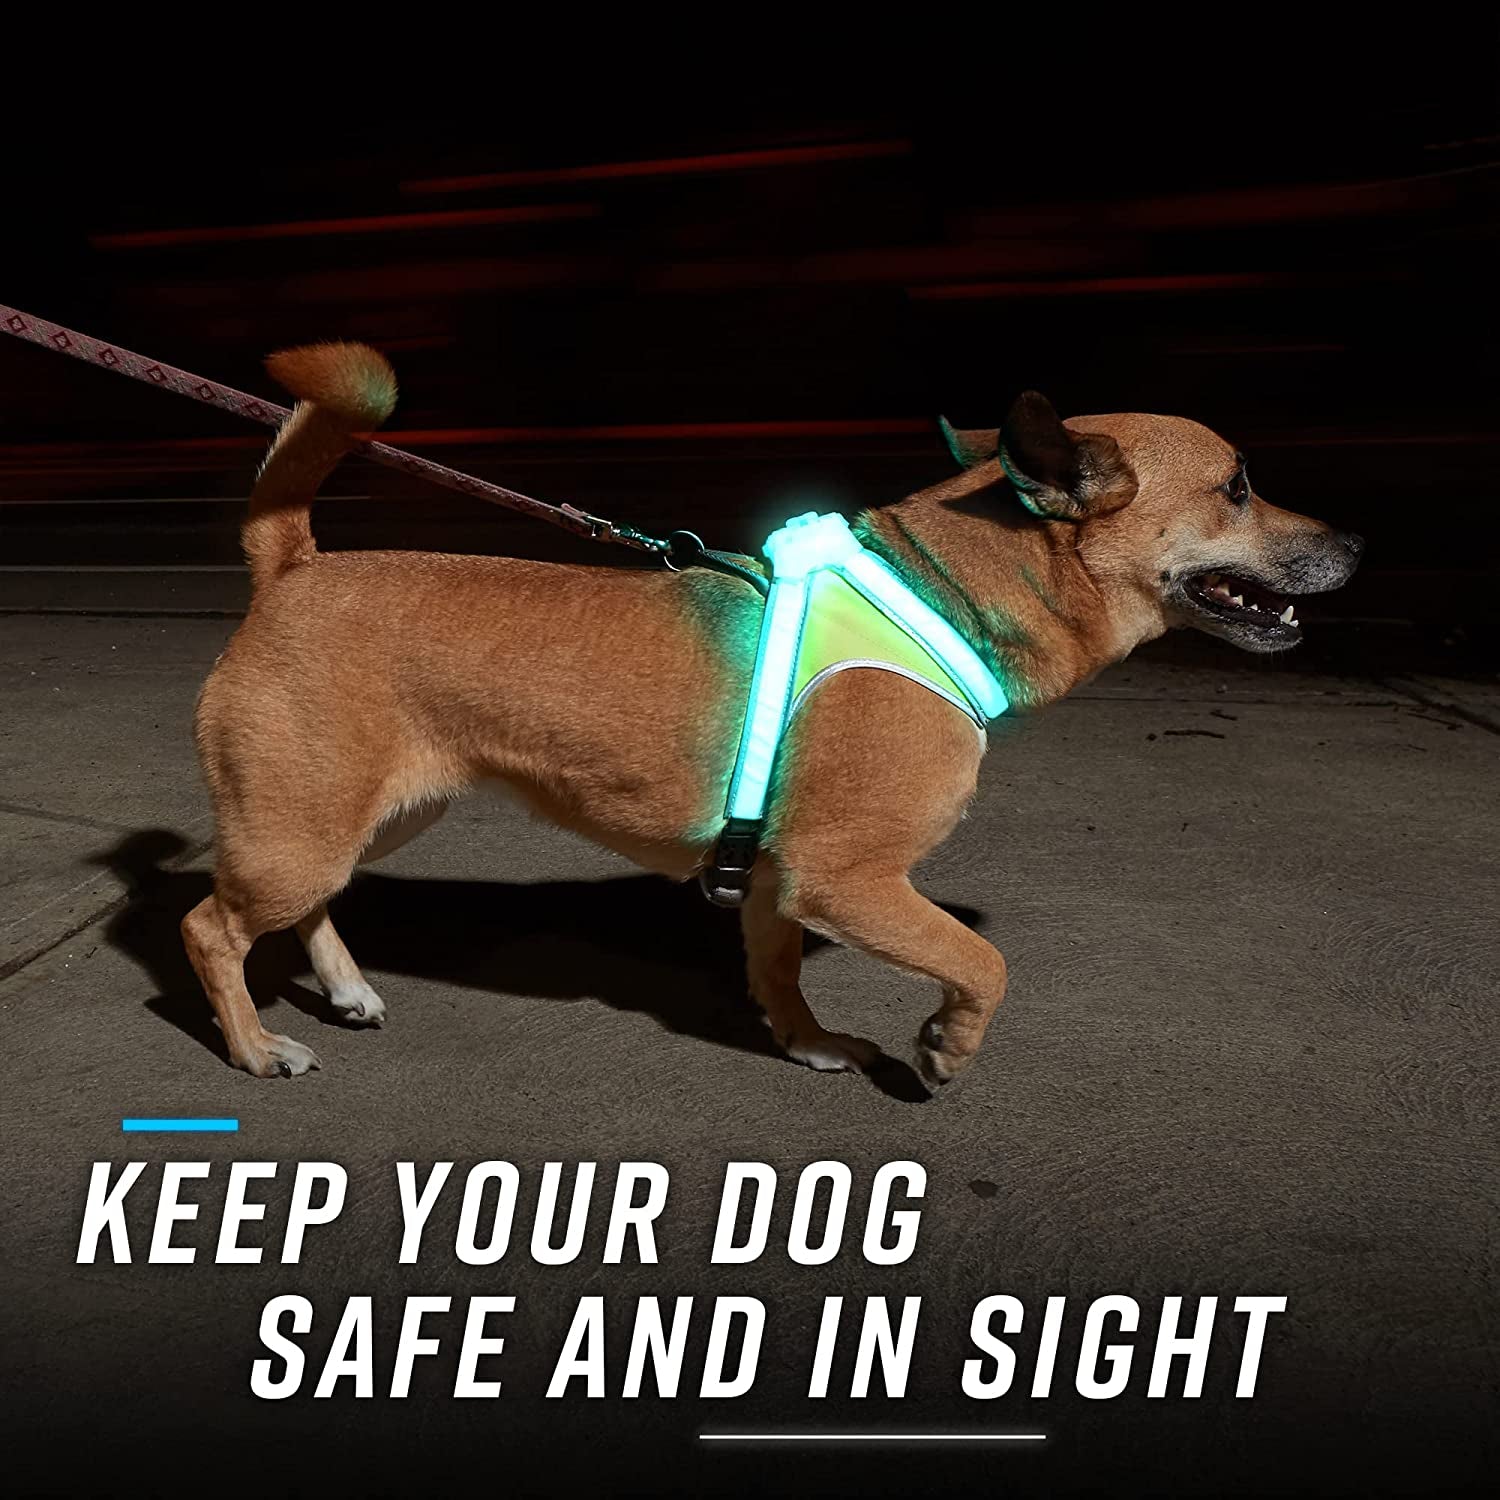 Lighthound – Revolutionary Illuminated and Reflective Harness for Dogs Including Multicolored LED Fiber Optics (USB Rechargeable, Adjustable, Lightweight, Rainproof) (Small)